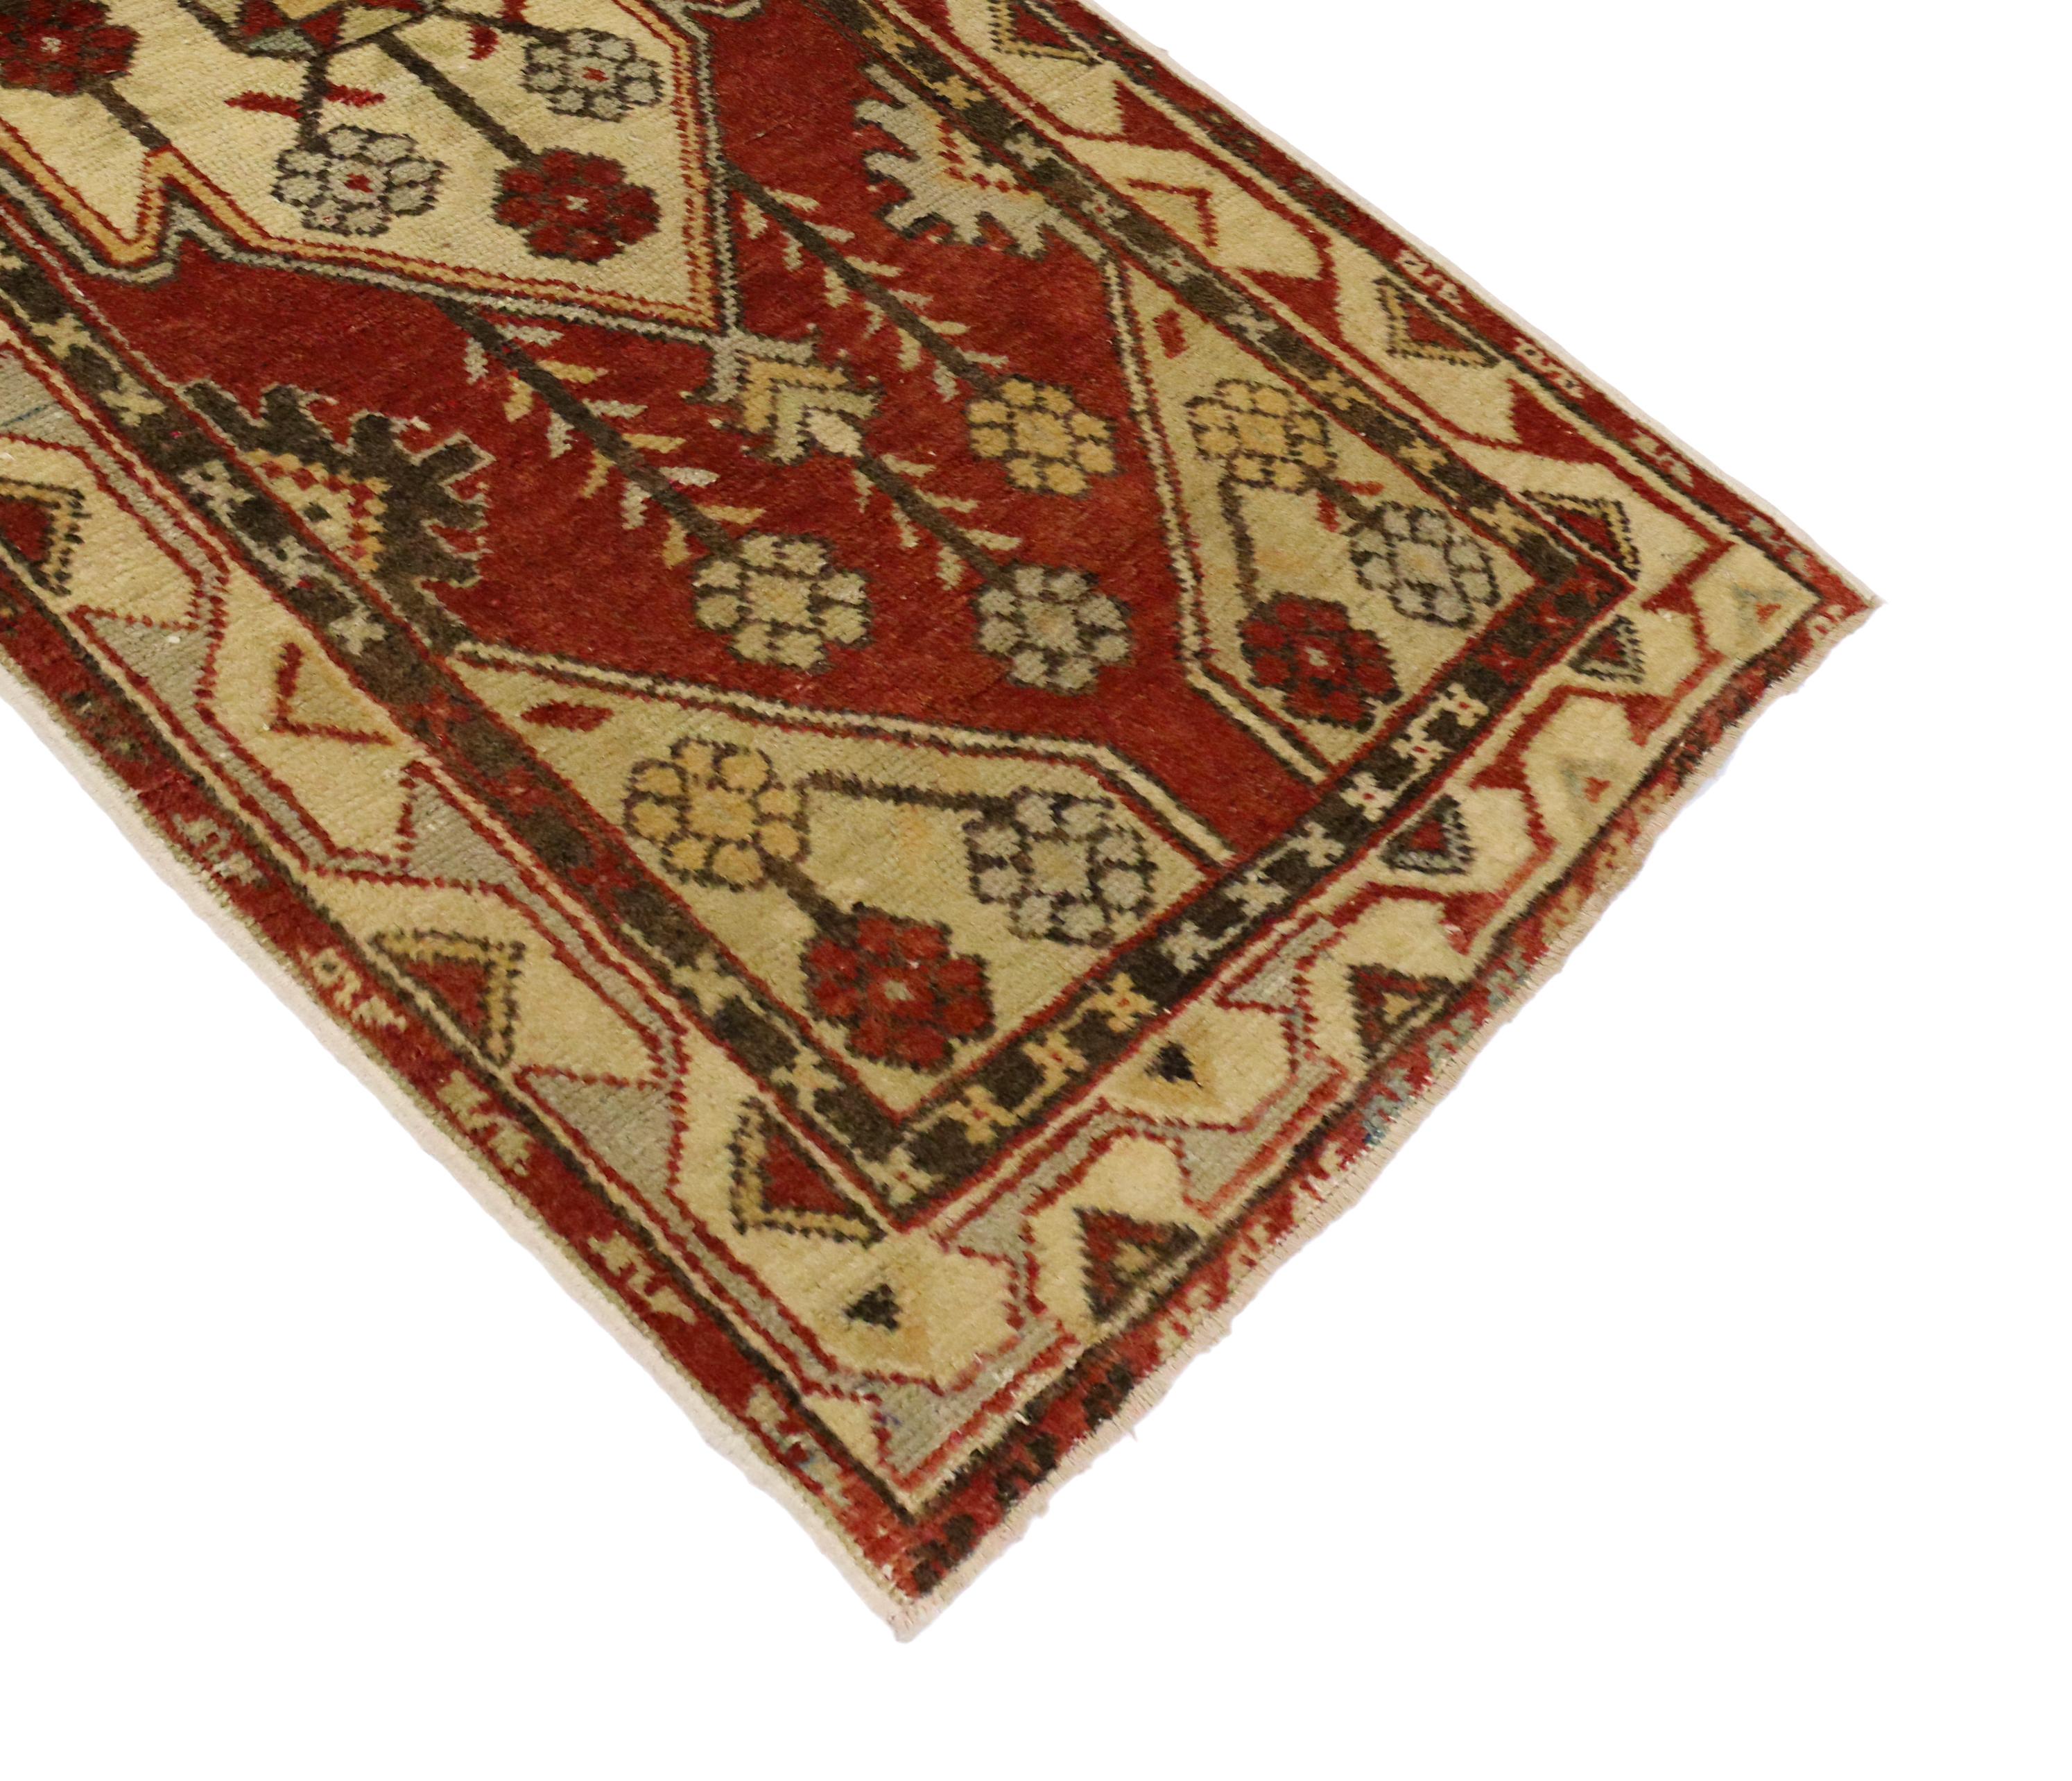 51458, vintage Turkish Oushak Accent rug, entry or foyer rug. This vintage Turkish Oushak rug features a modern traditional style. Immersed in Anatolian history and refined colors, this vintage Oushak rug combines simplicity with sophistication.